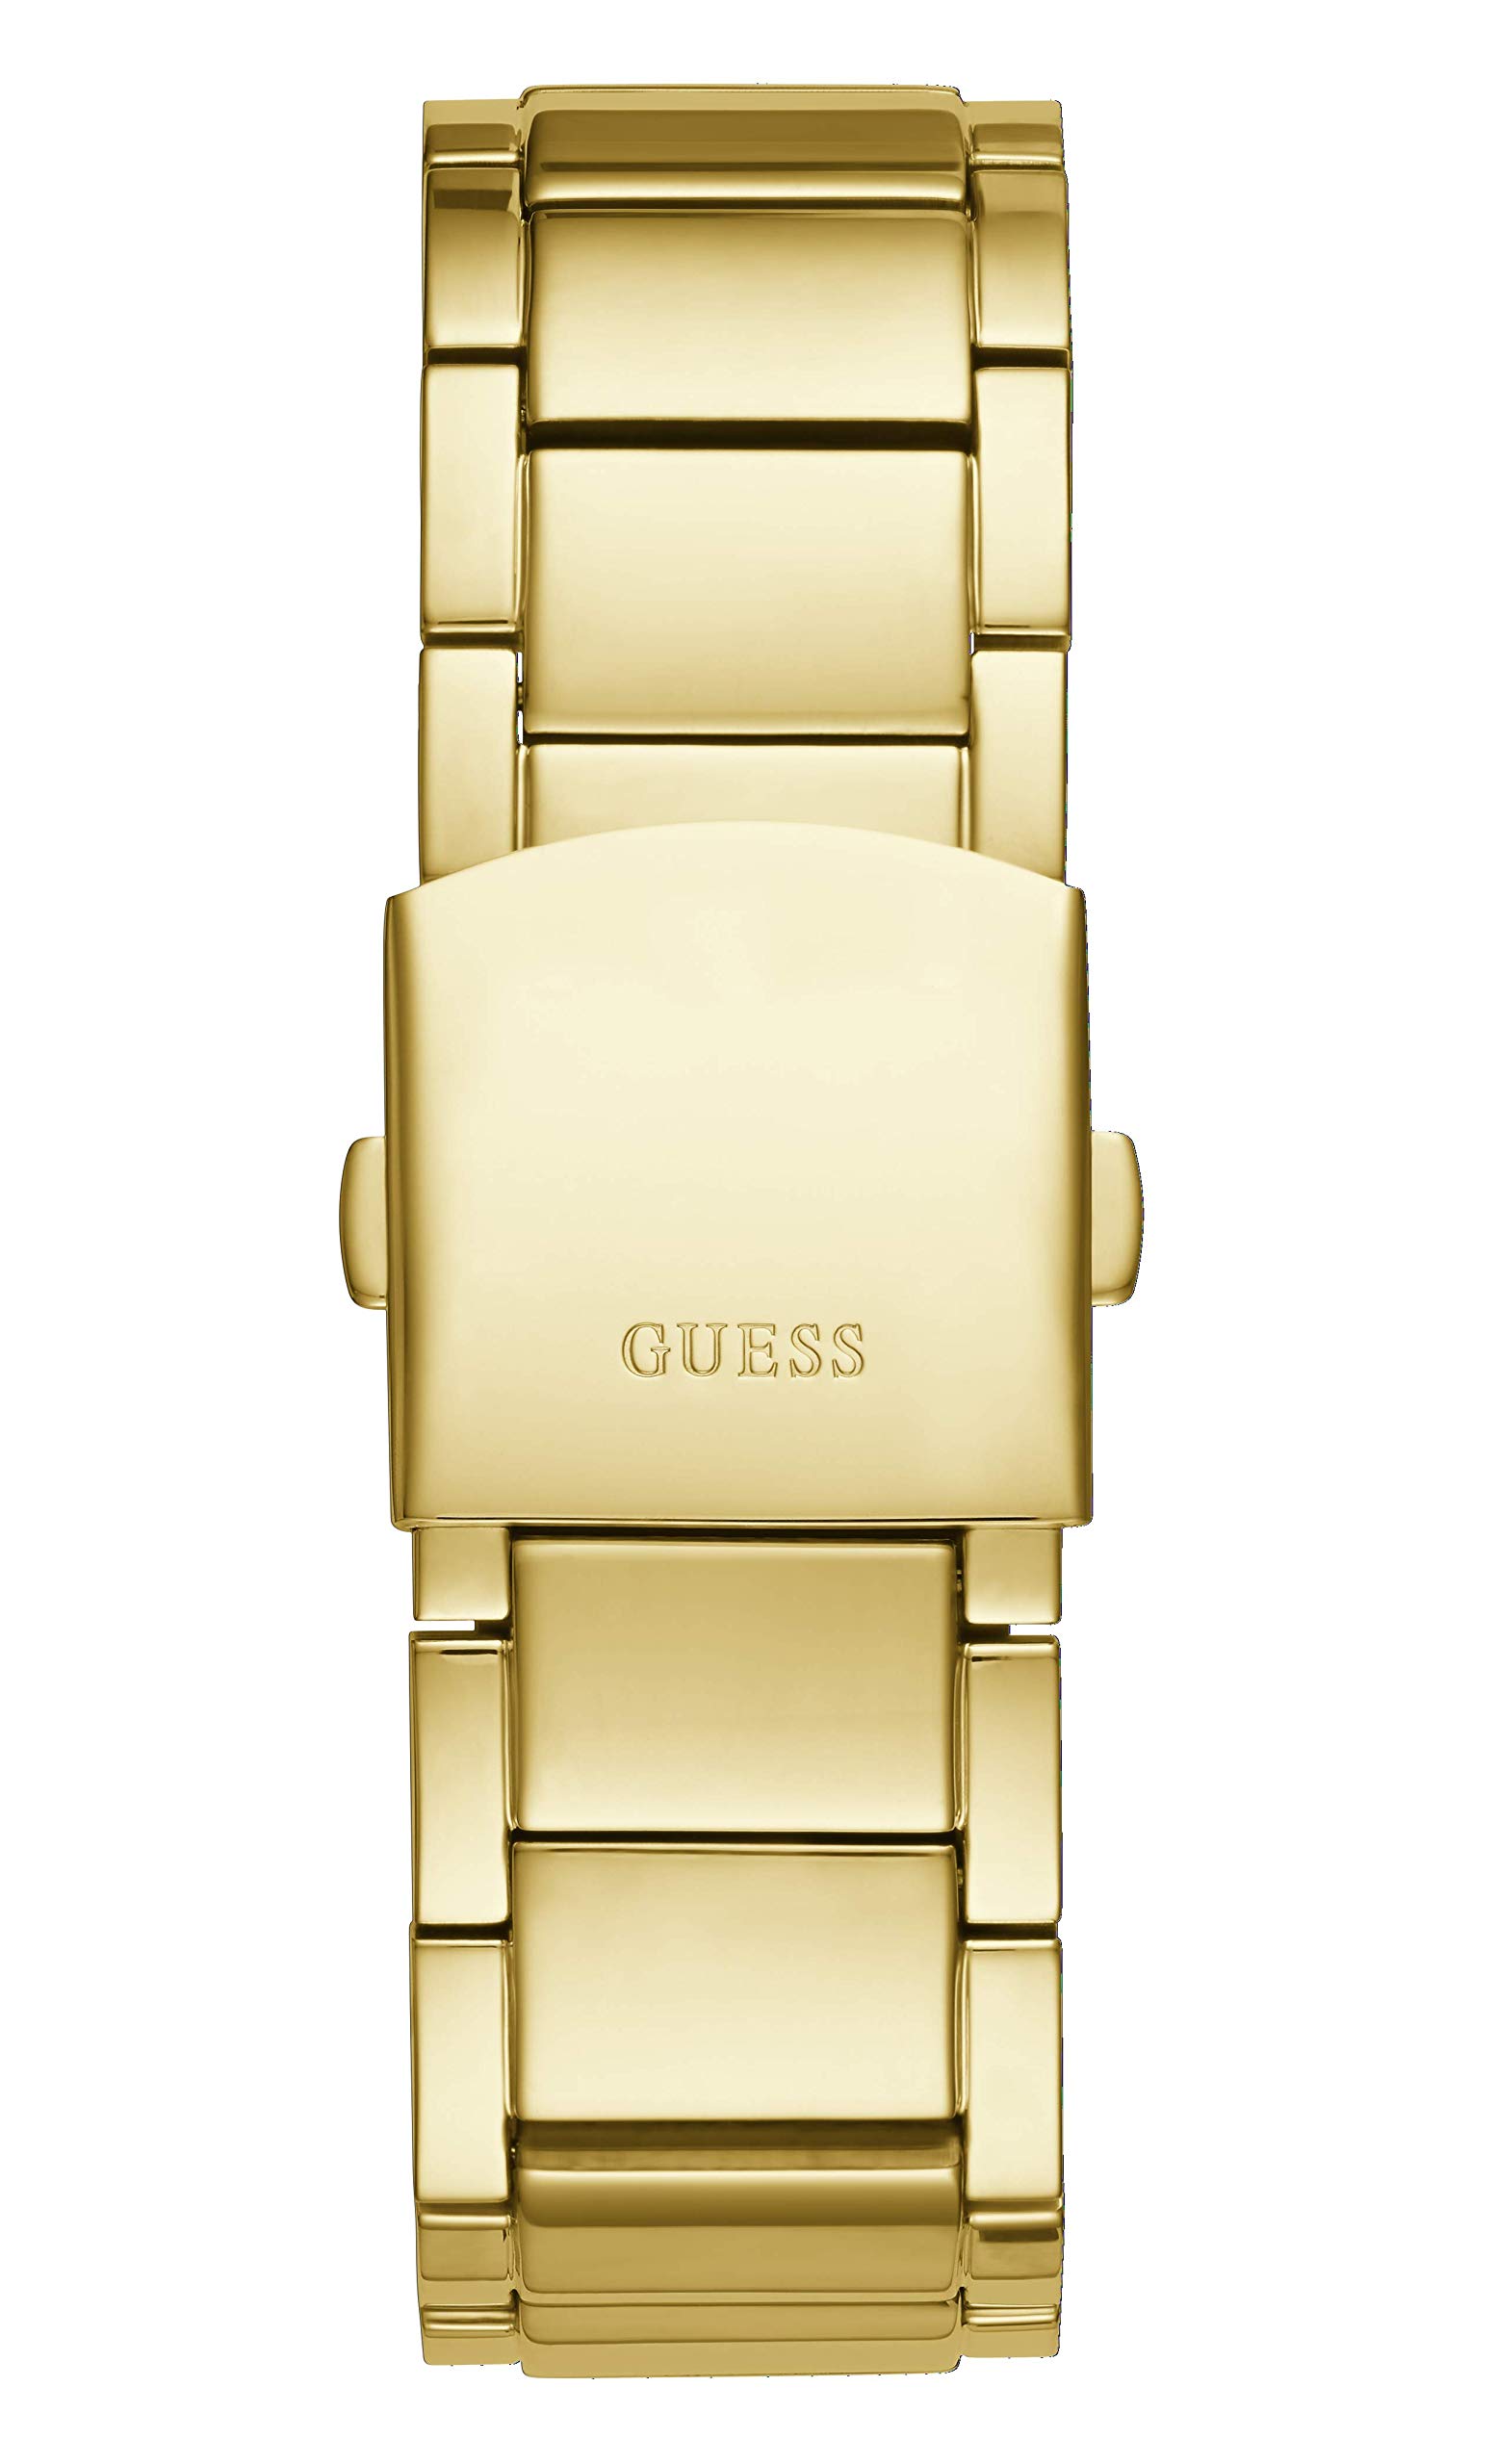 Guess Watches Gents Legacy Mens Analog Quartz Watch with Stainless Steel Bracelet W1305G2